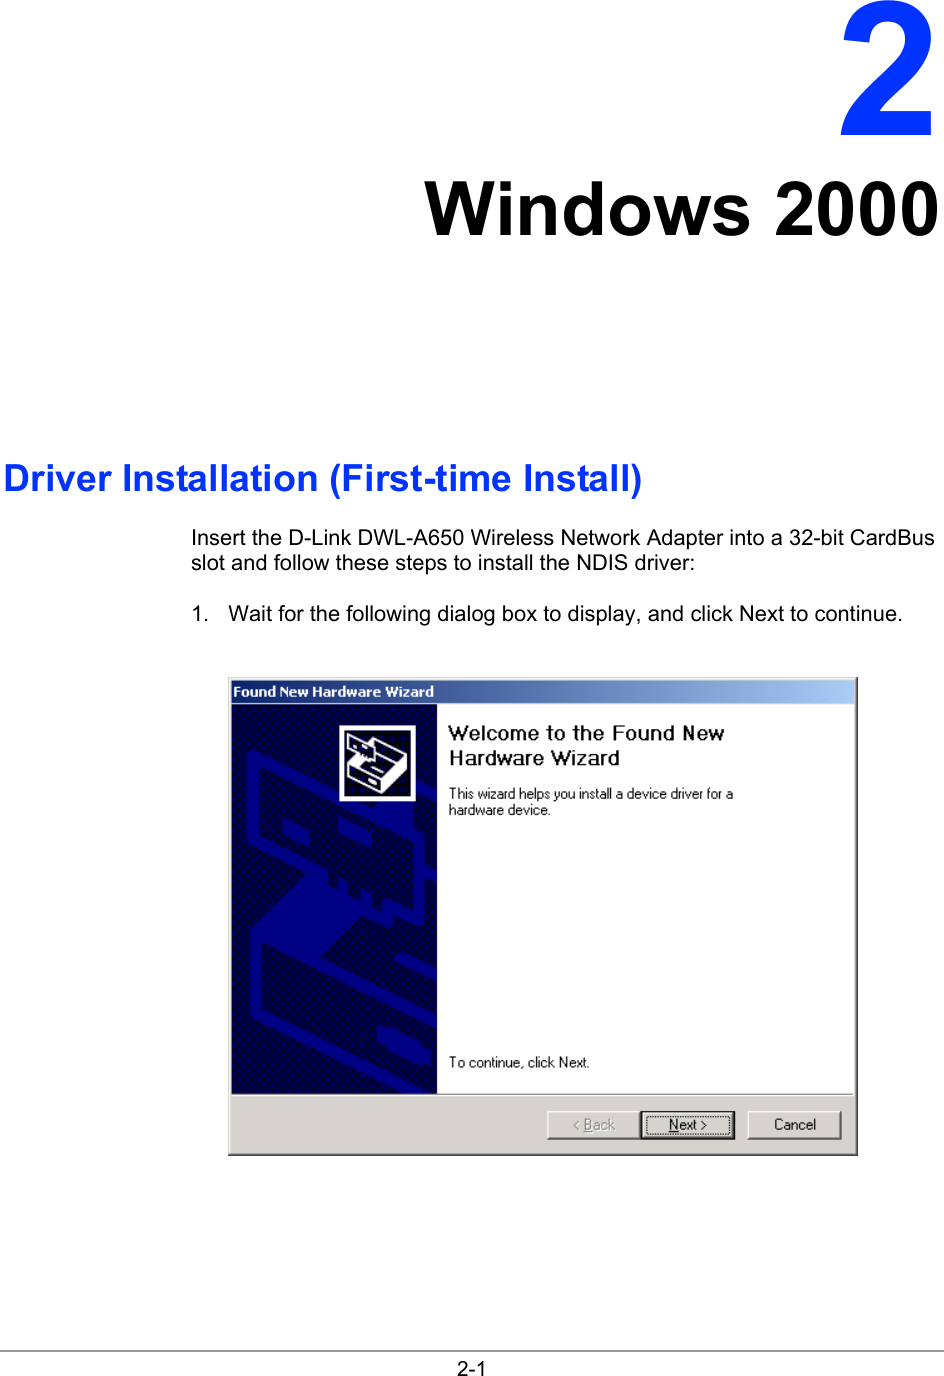  2-1 2 Windows 2000 Driver Installation (First-time Install) Insert the D-Link DWL-A650 Wireless Network Adapter into a 32-bit CardBus slot and follow these steps to install the NDIS driver: 1.  Wait for the following dialog box to display, and click Next to continue.   